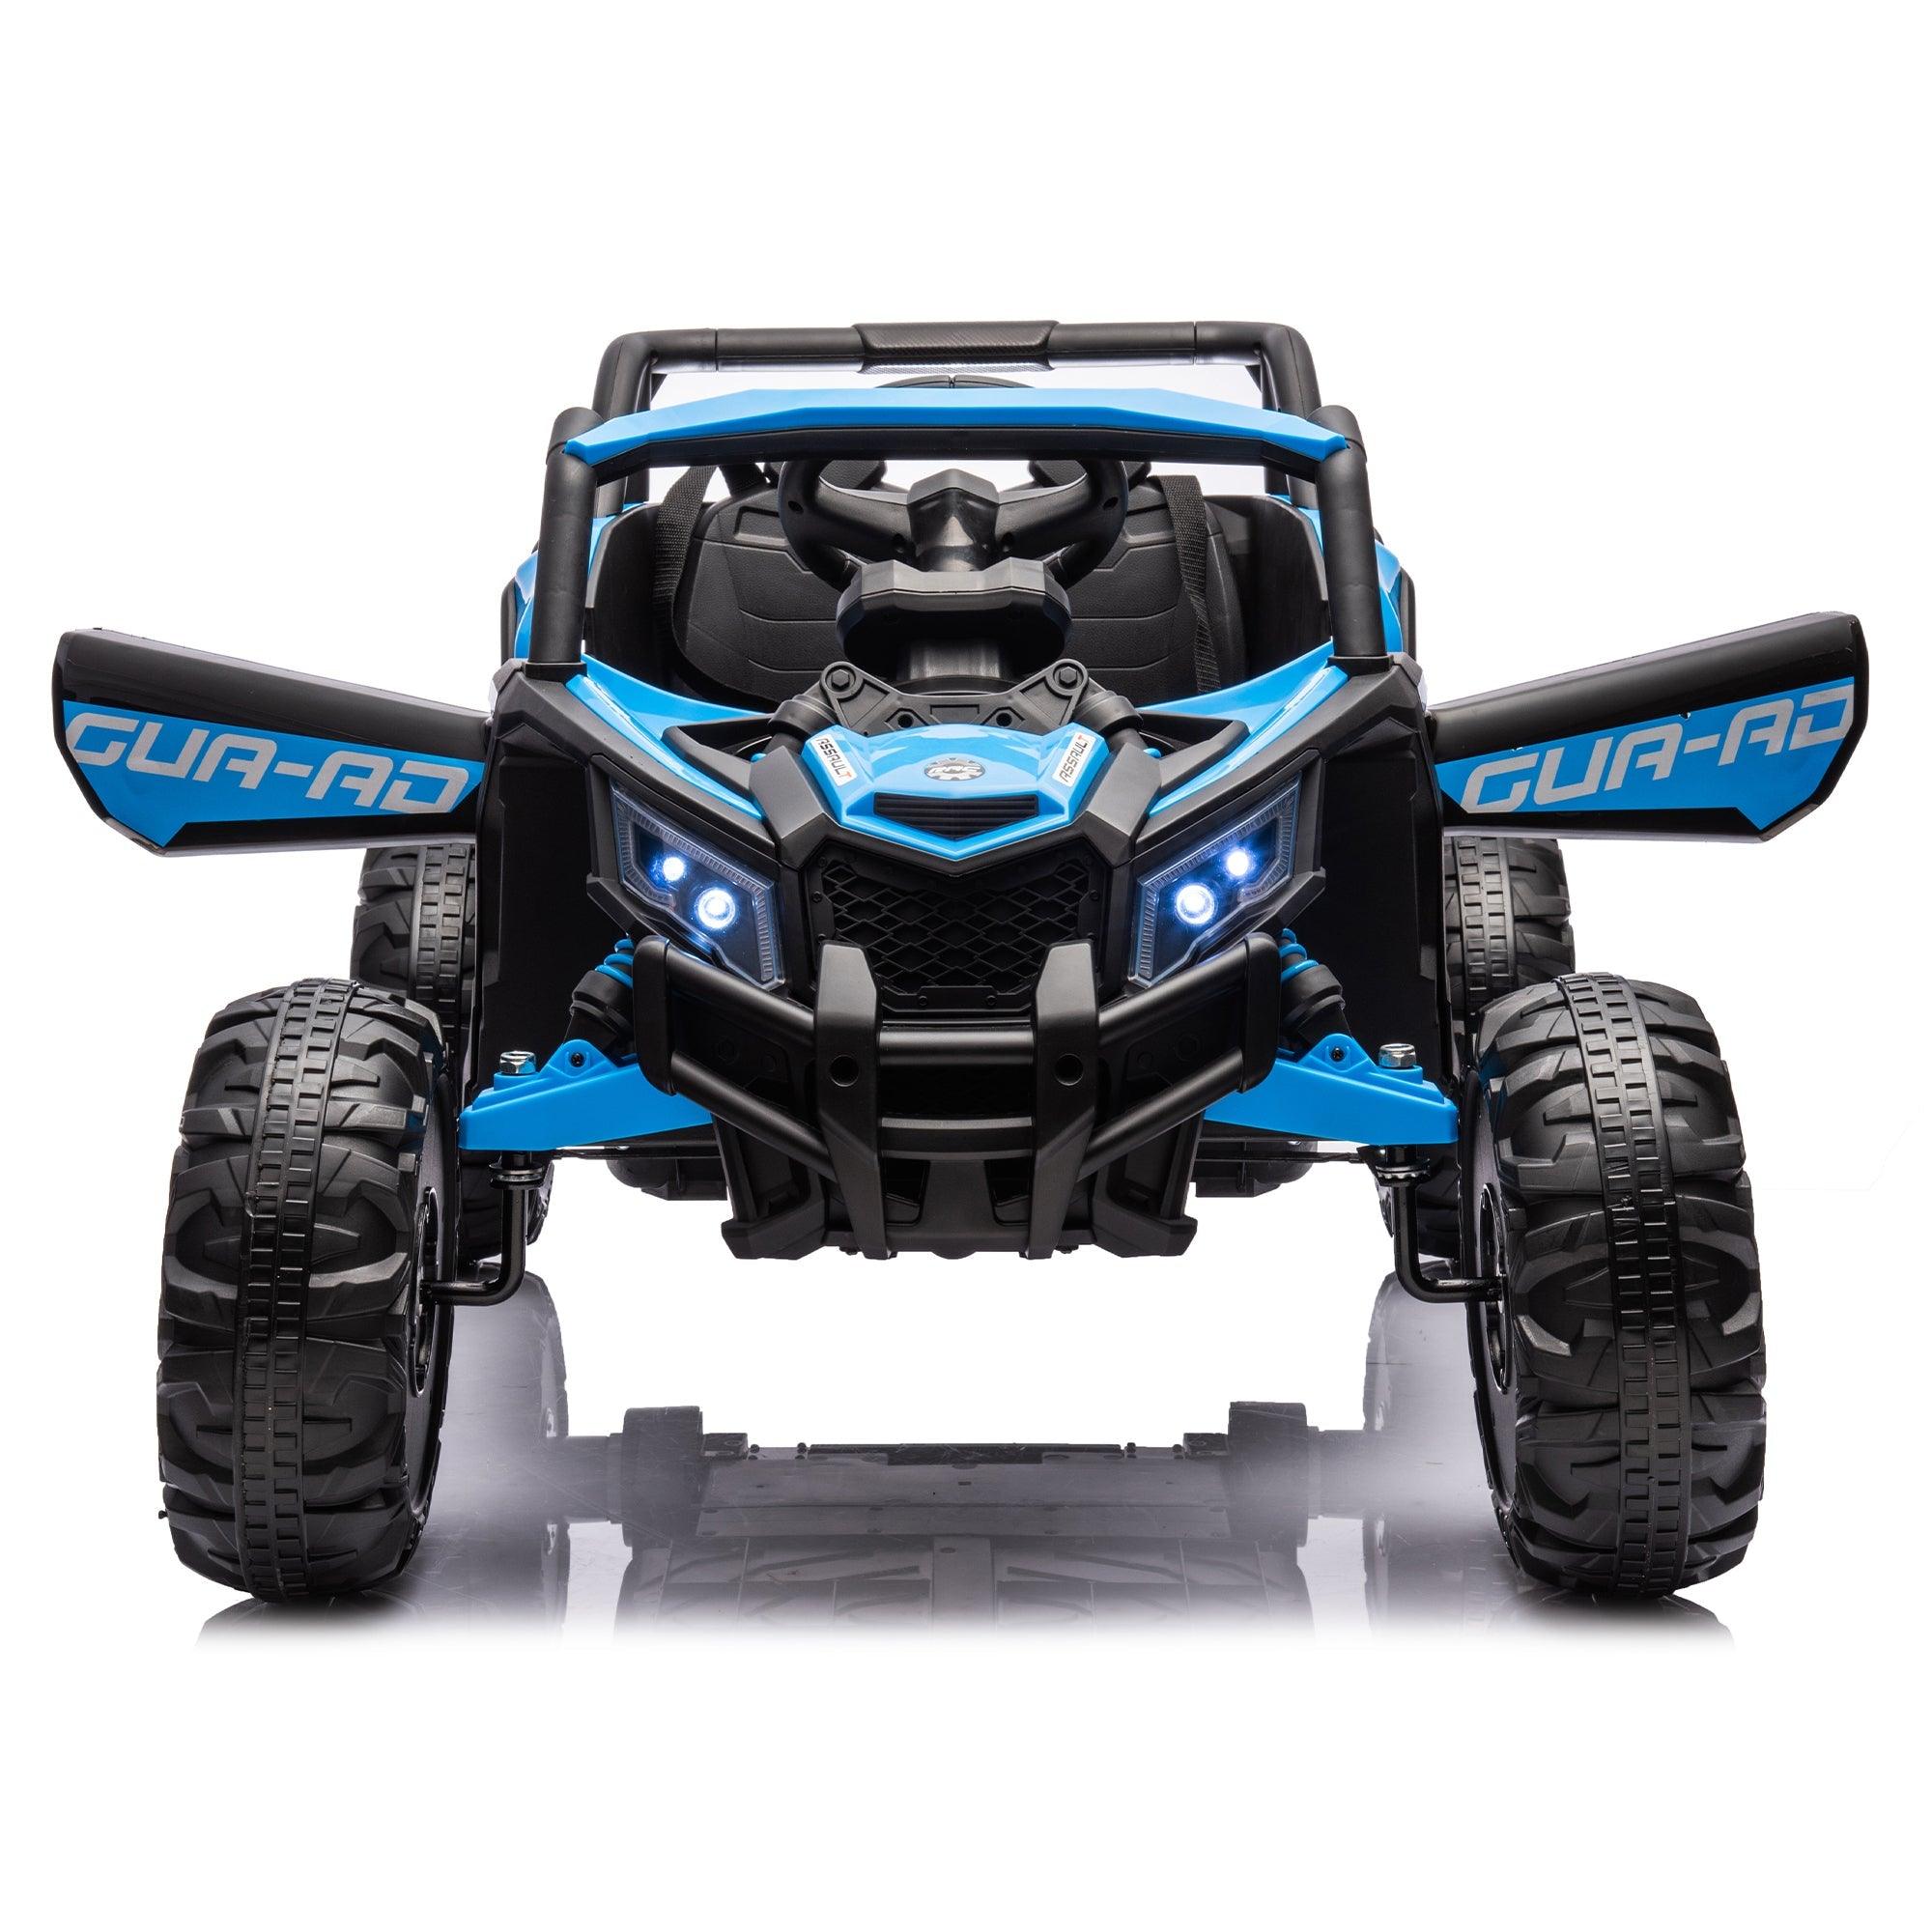 12V Ride On Car With Remote Control, UTV Ride On For Kid, 3-Point Safety Harness, Music Player (USB Port/Volume Knob/Battery Indicator), LED Lights, High-Low Speed Switch - Off-Road Adventure For Kids LamCham